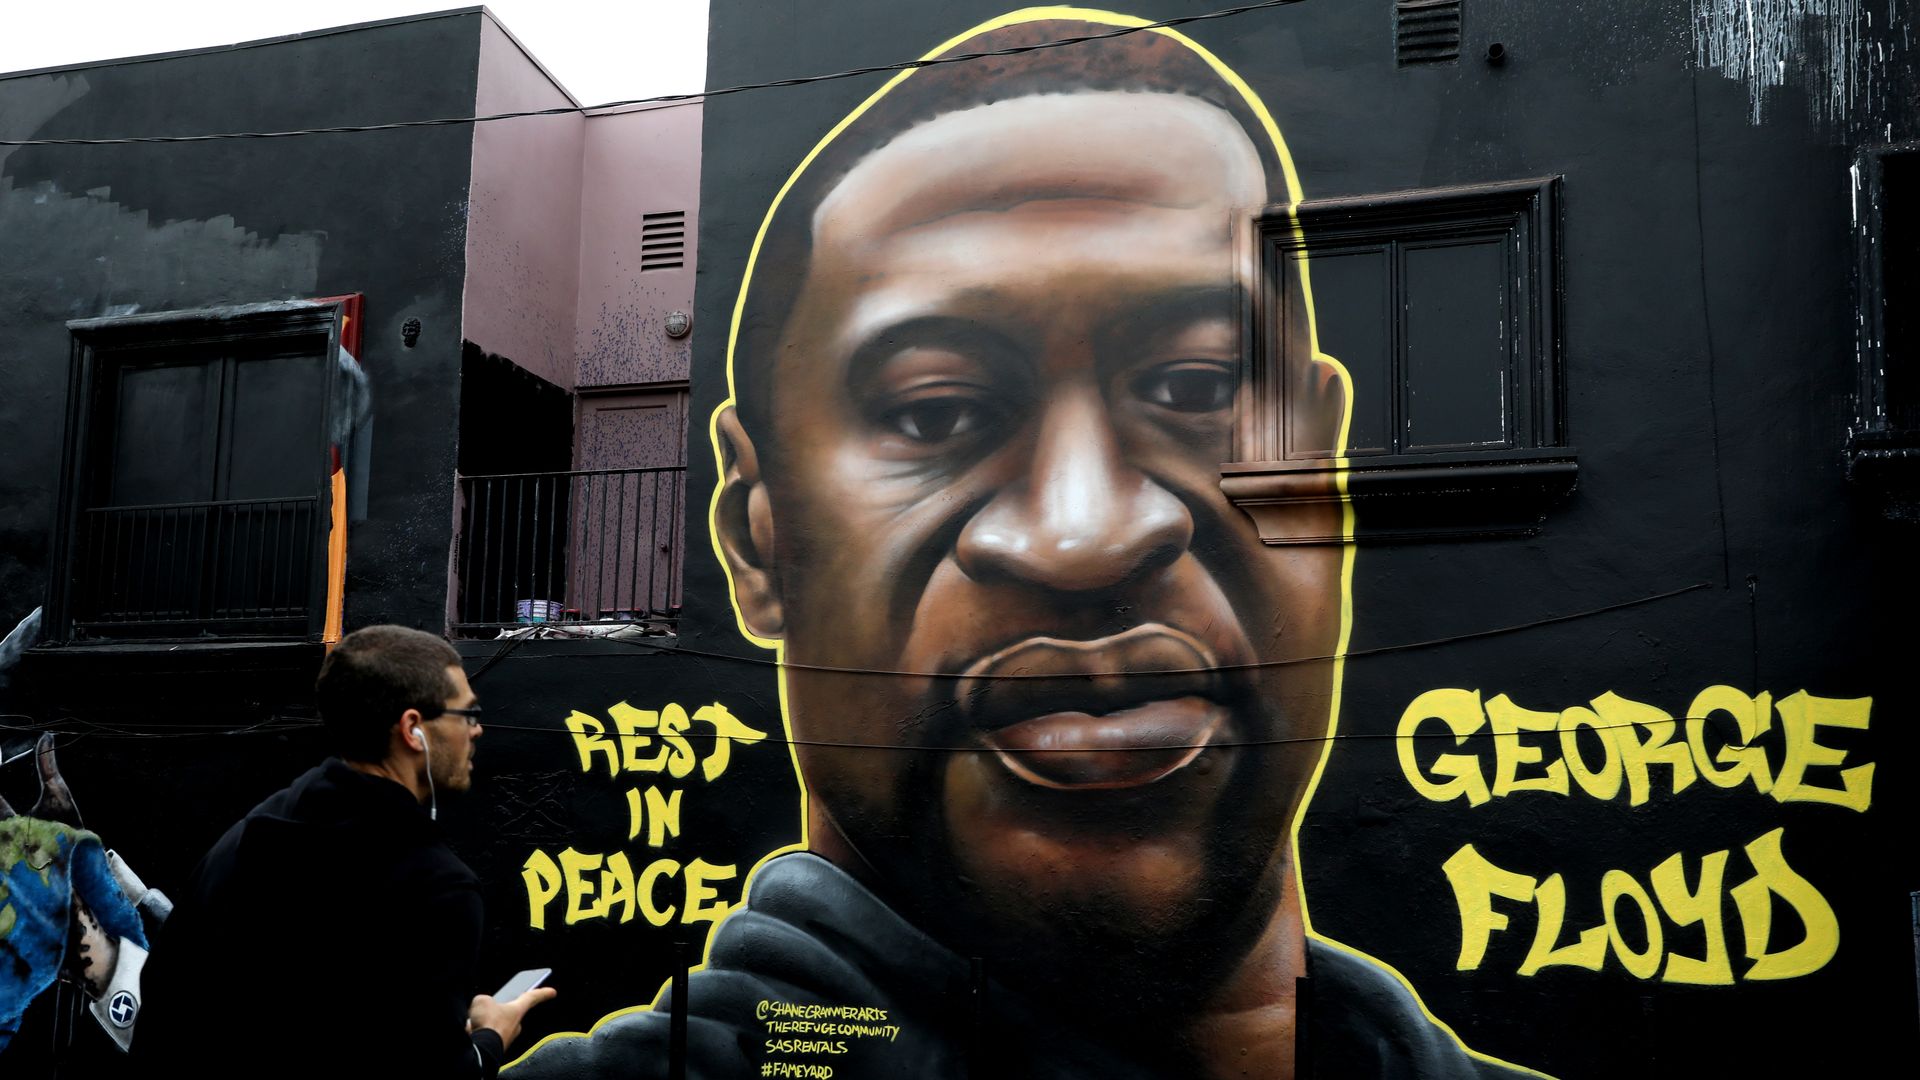 A mural of George Floyd is seen on the side of a building with the words "rest in peace" painted